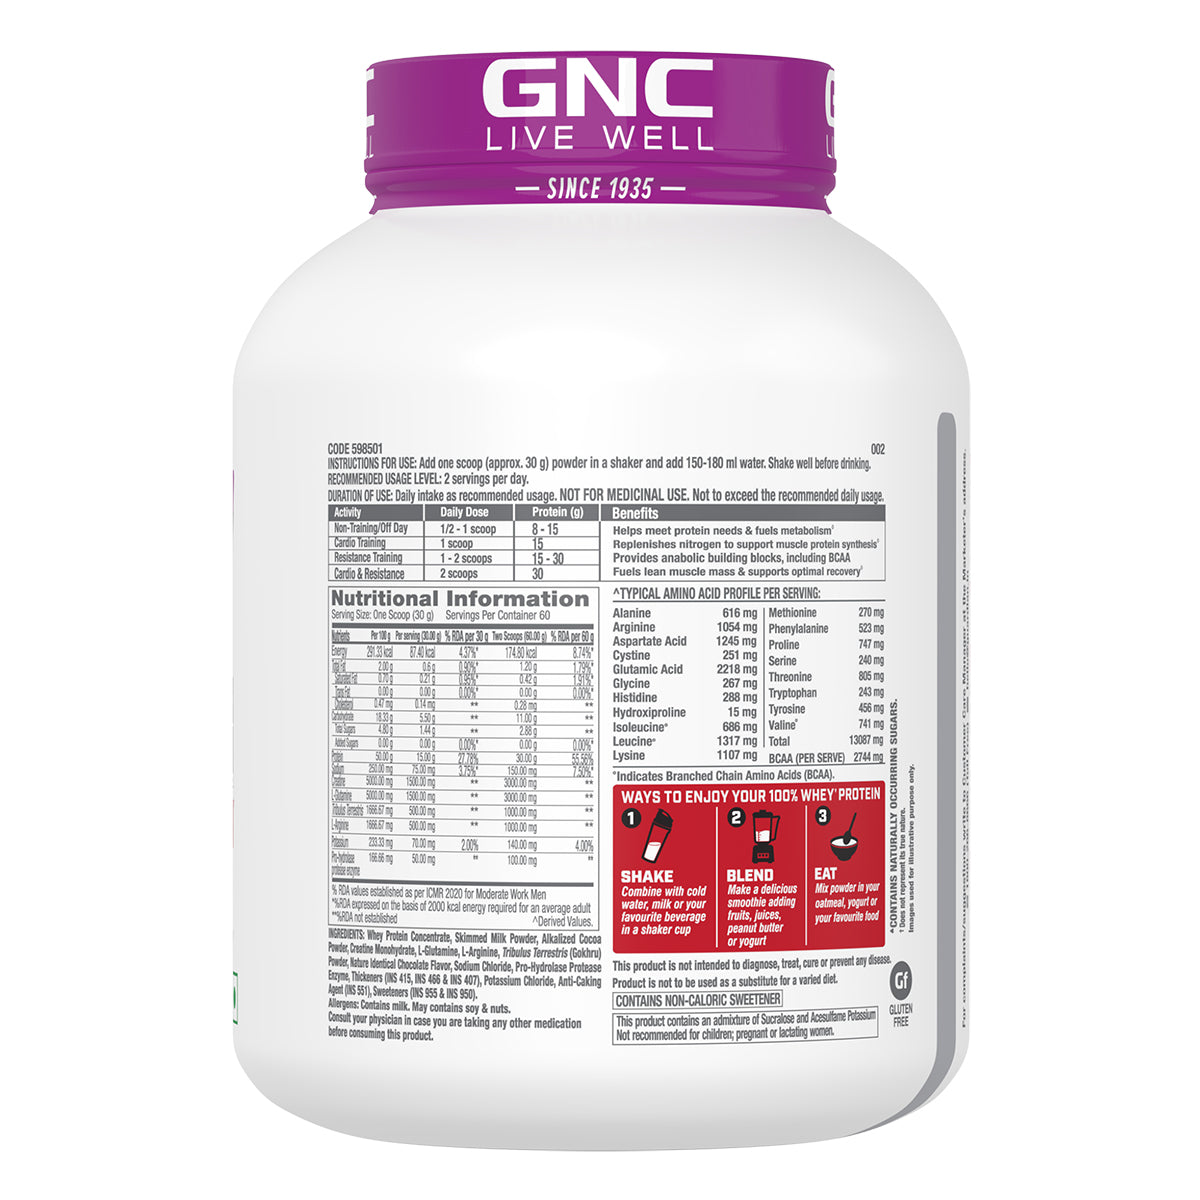 GNC Pro Performance Power Protein 4 lbs with Gym Kit - Helps Build Muscle Strength & Recovery 